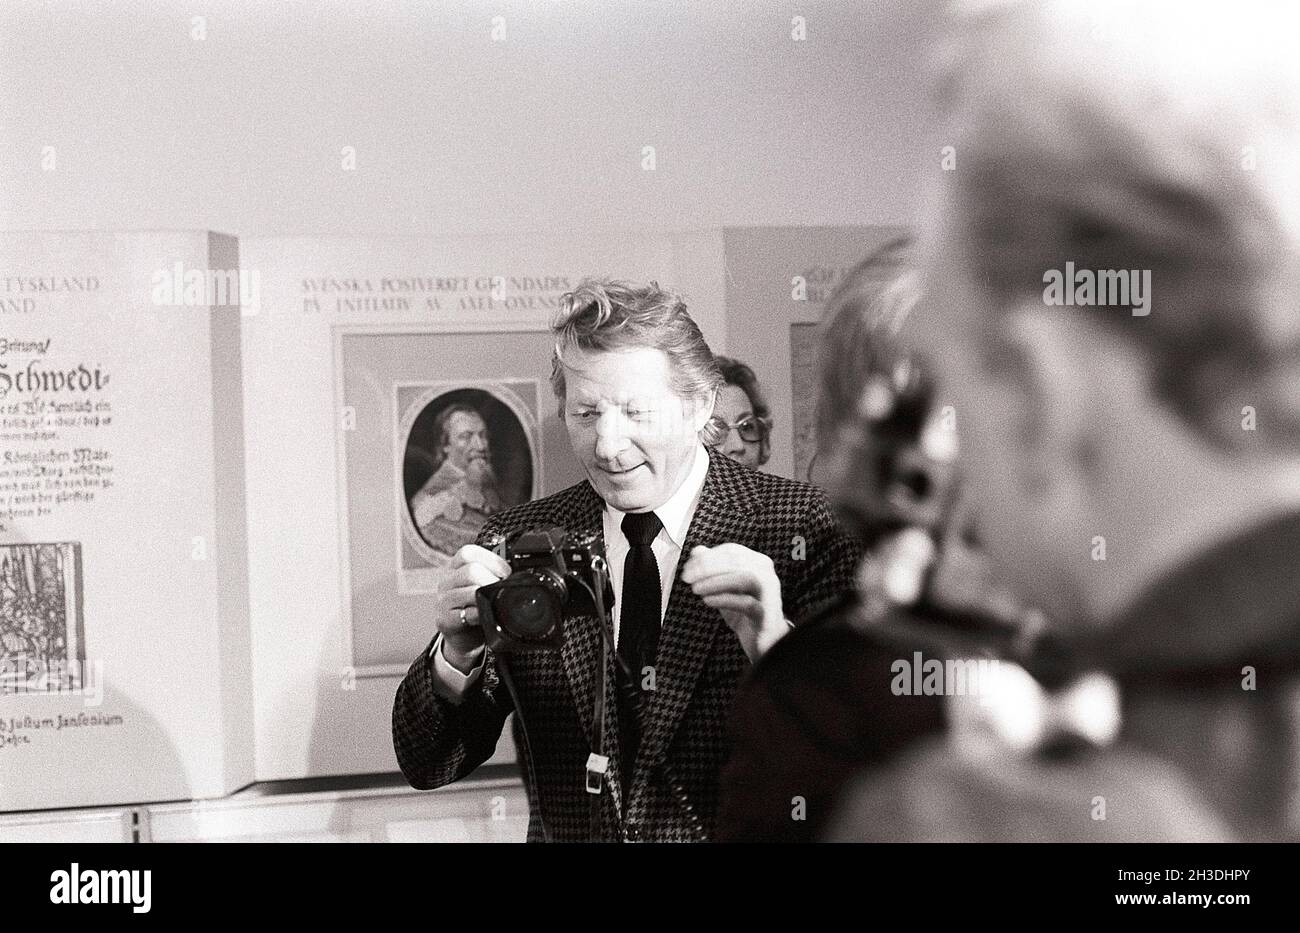 Danny Kaye. 1911-1987.  American actor etc pictured during a visit to Sweden in december 1974 where he holds a camera.  Ref Kristoffersson EF167 Stock Photo